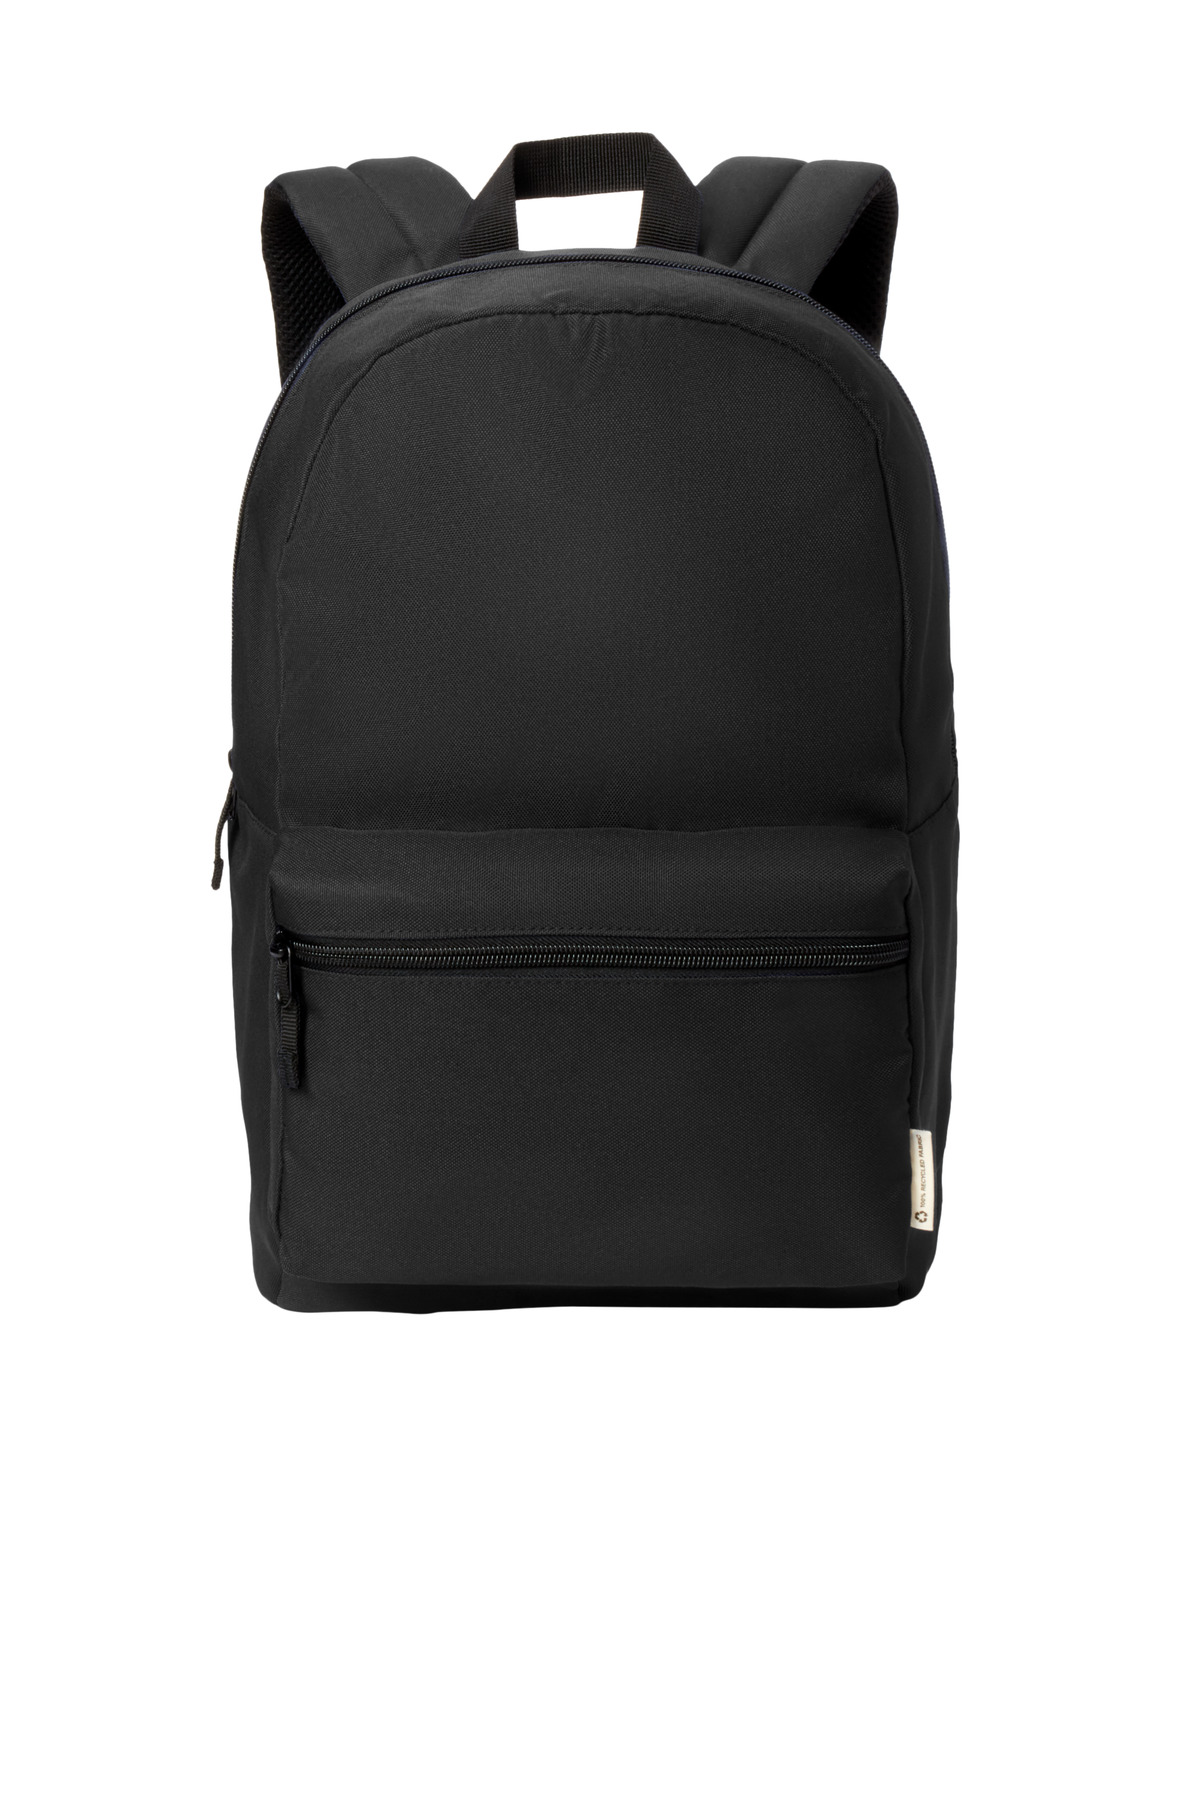 Port Authority C-FREE Recycled Backpack-Port Authority